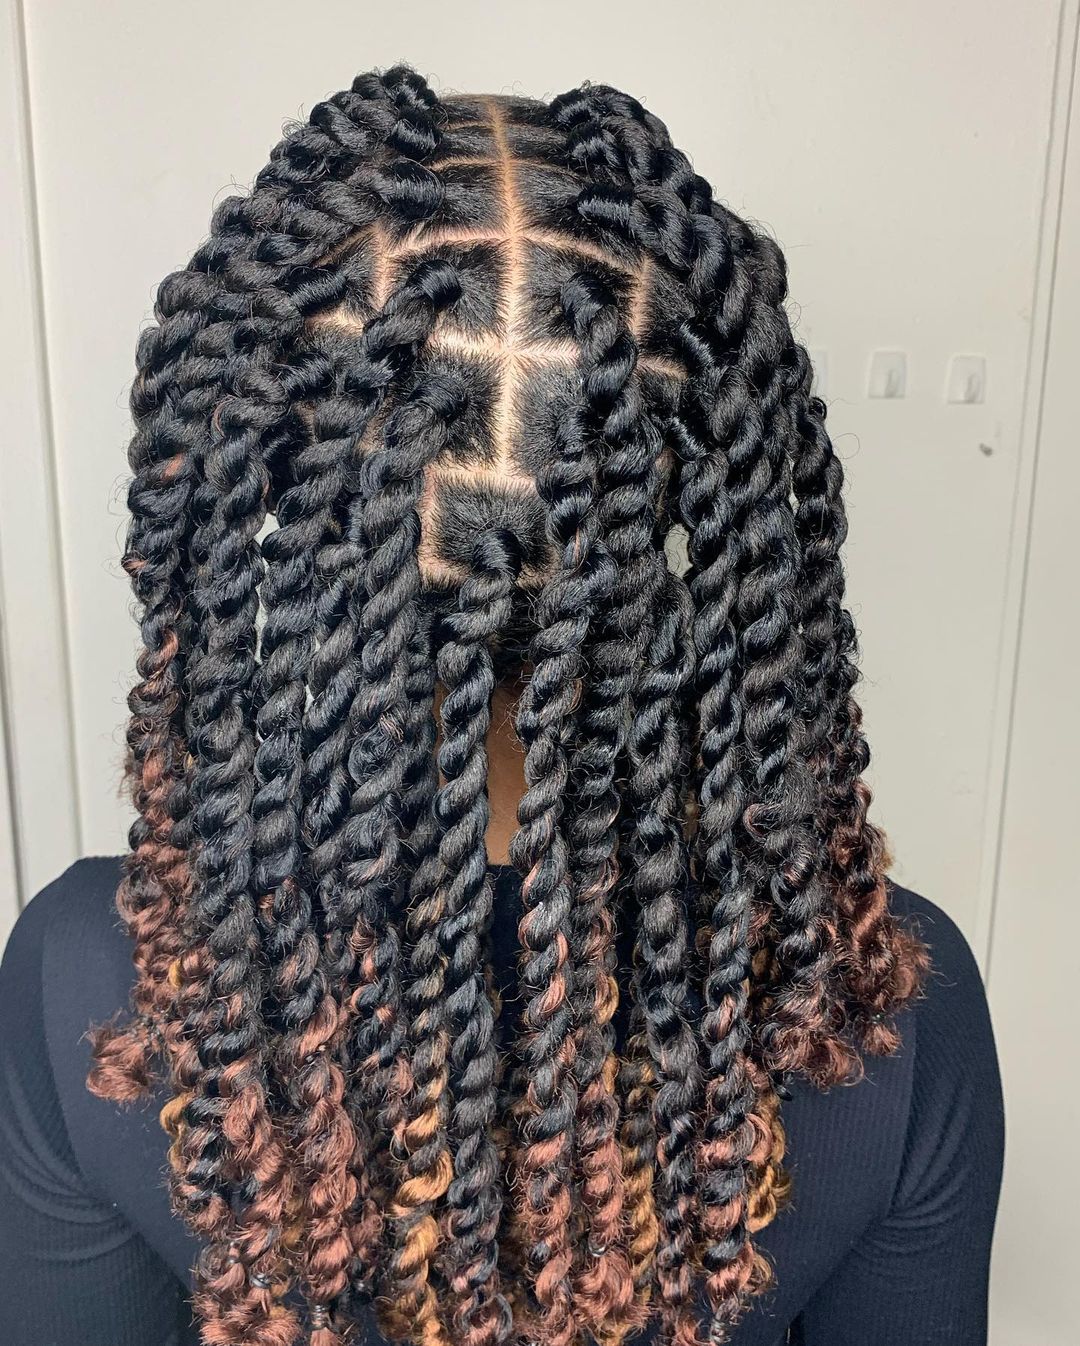 13. Black Chunky Two-Strand Twists With Colored Ends